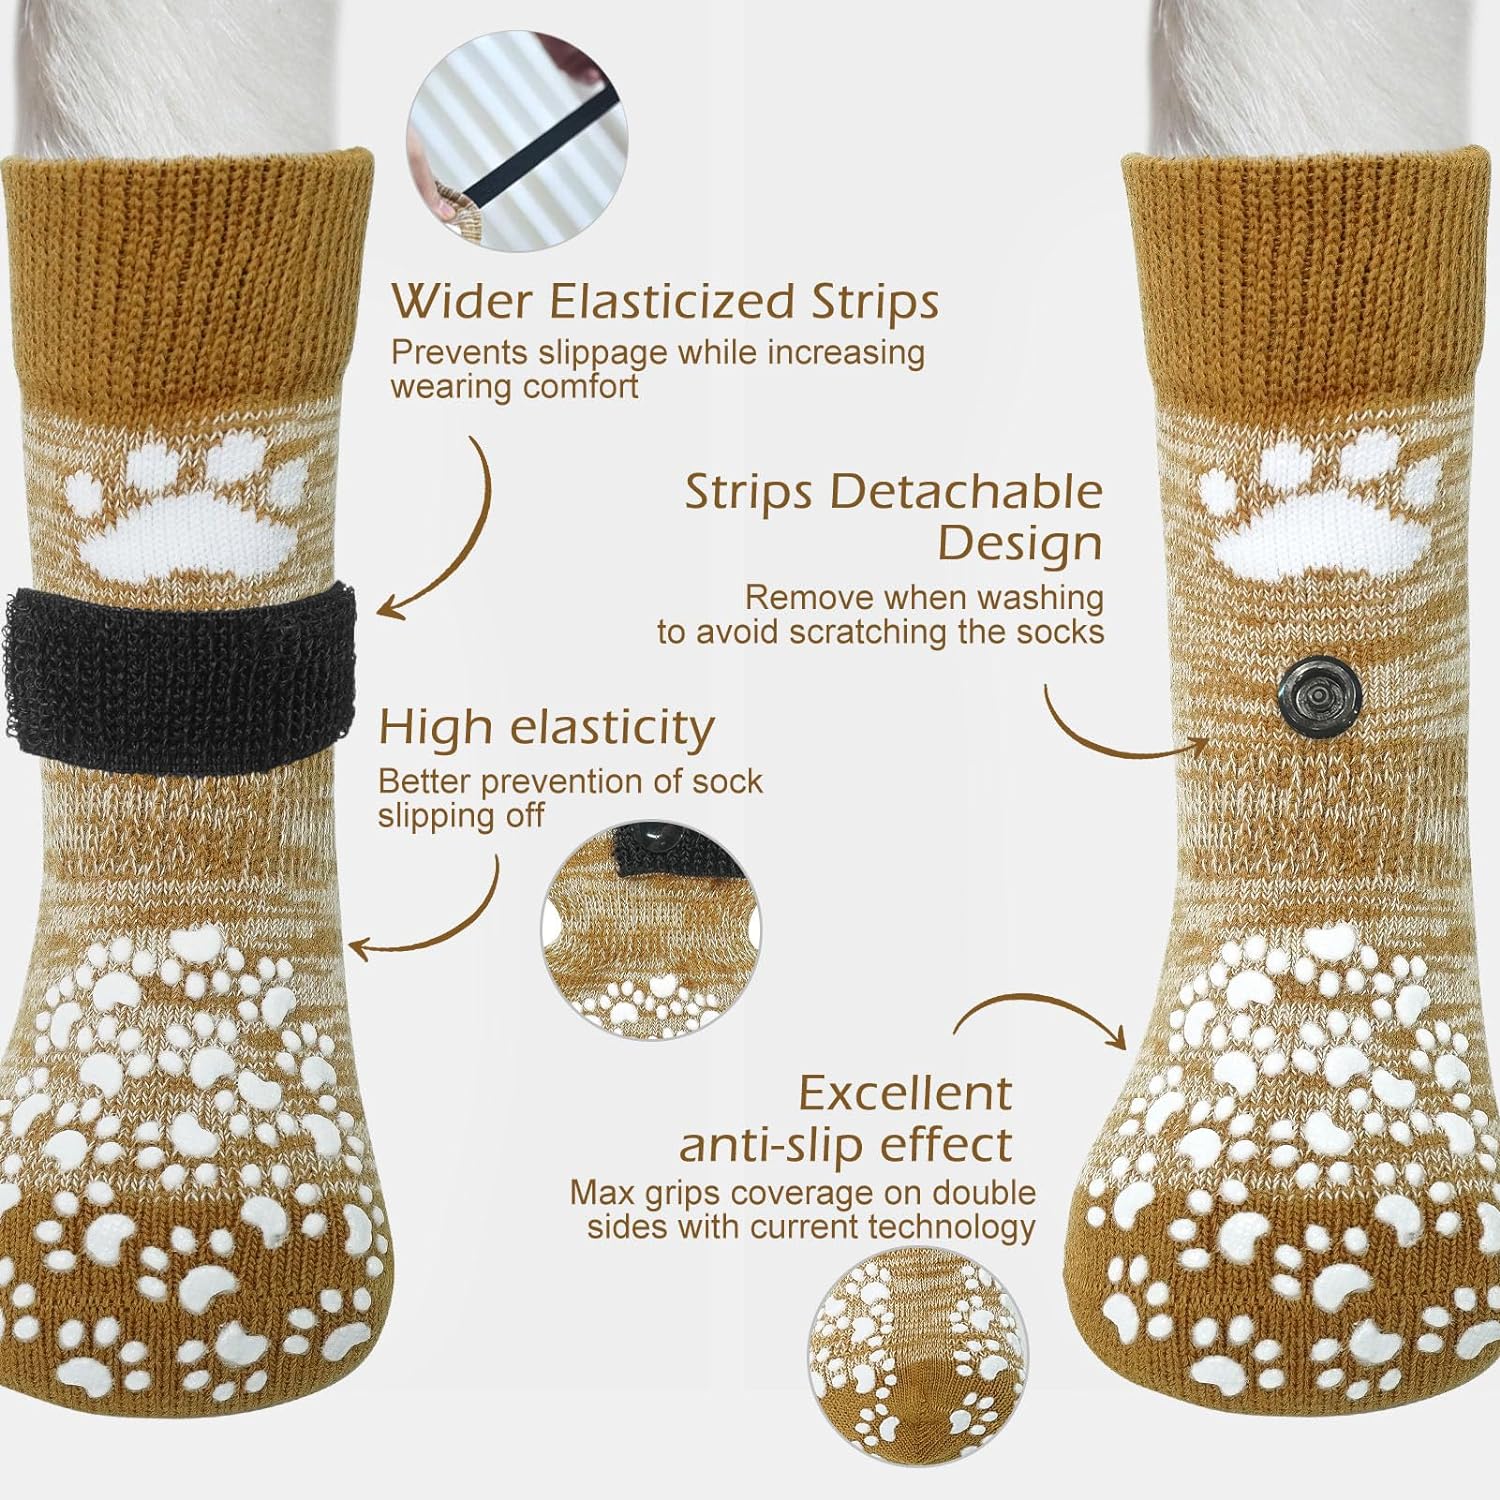 Anti-Slip Dog Socks 4 Pcs-Double Sides Grips Traction Control on Hardwood  Floor,Best Paw Protector Indoor Prevents Licking,Dog Booties for Hot